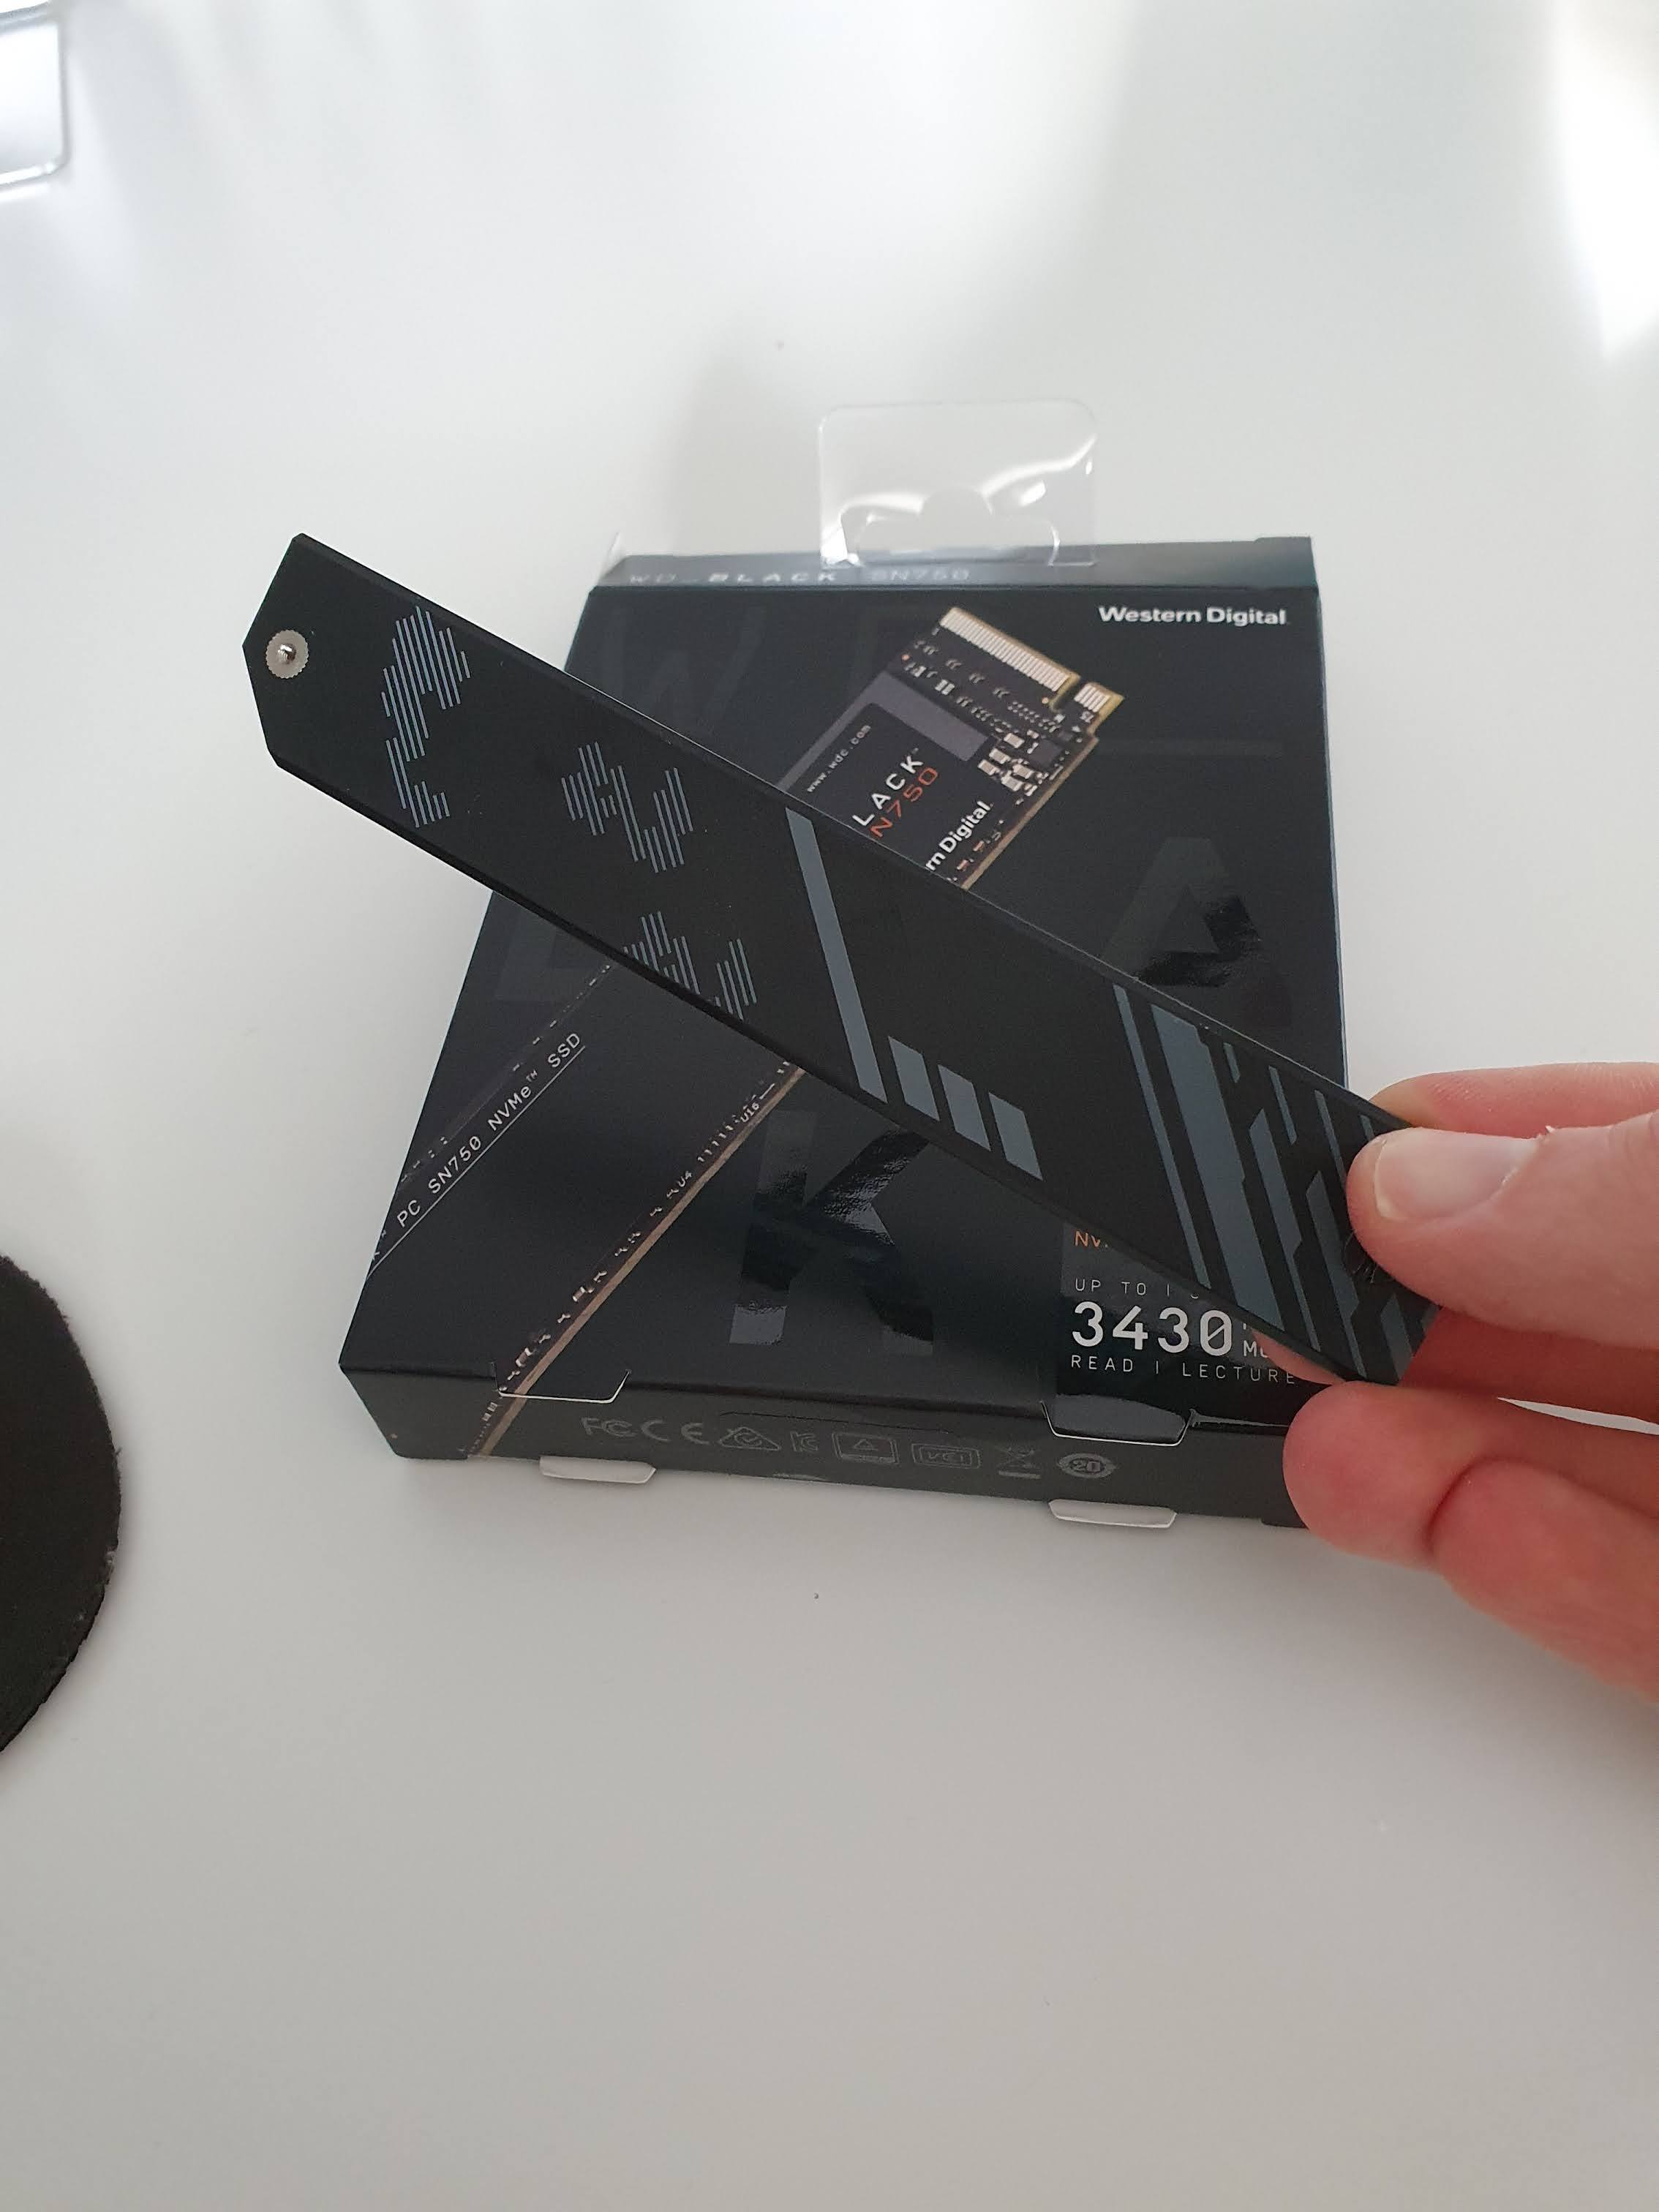 Nvme Ssd Do I Need To Take The Sticker Off Before Applying The Heatsink Storage Devices Linus Tech Tips